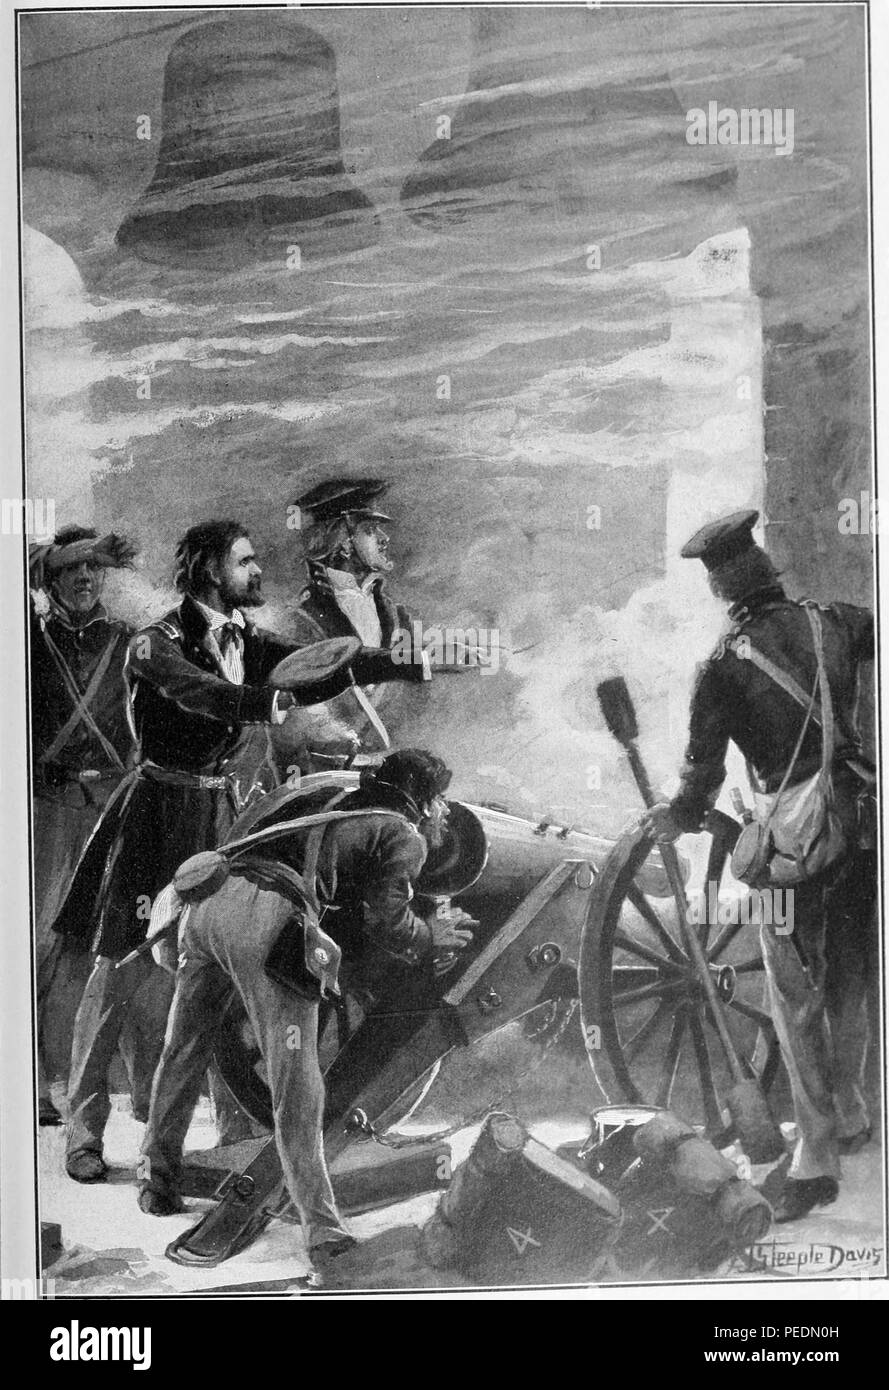 Black and white print of 18th president of the United States, Ulysses Simpson Grant, during the 1847 bombardment of Mexico, Grant is bareheaded, holding his hat in one hand and pointing with the other to direct the aim of a soldier bent over a howitzer, with several other soldiers crowded around, based on an original painting by artist John Steeple Davis, 1913. Courtesy Internet Archive. () Stock Photo